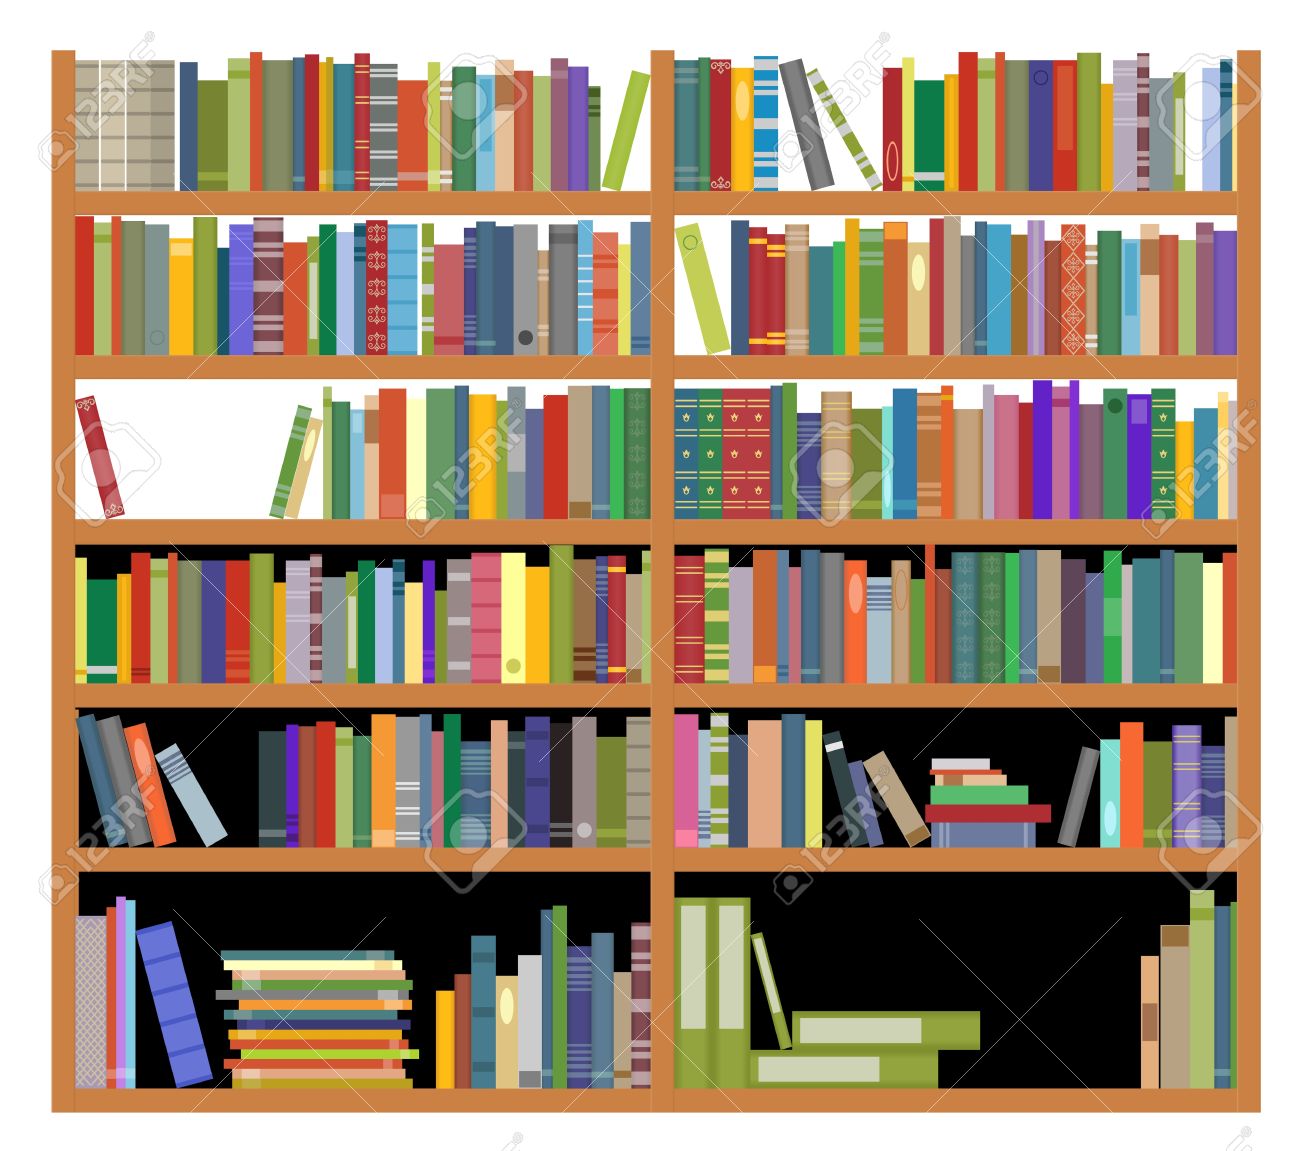  collection of library. Bookshelf clipart school